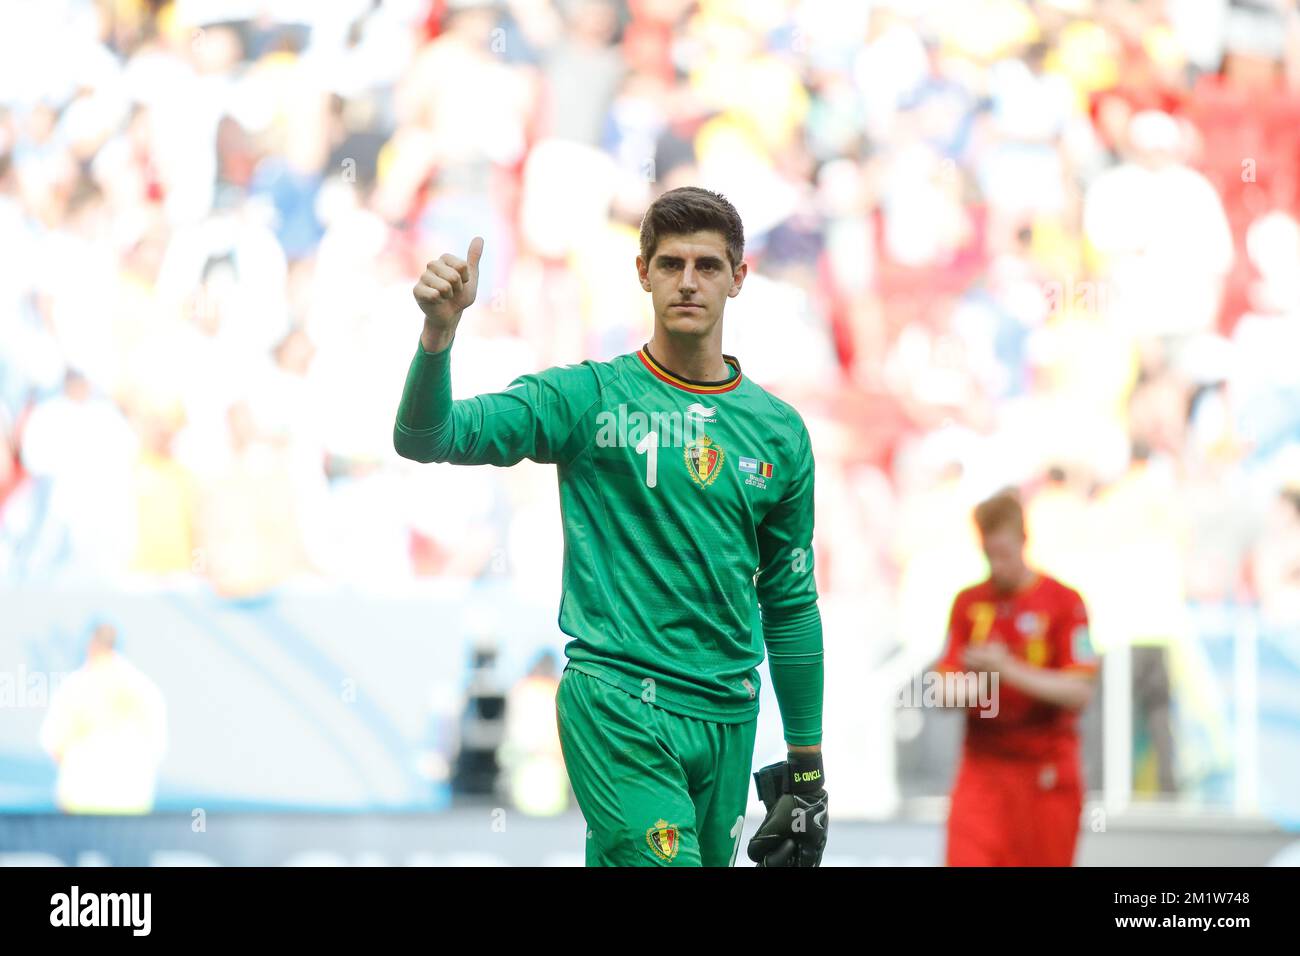 Belgium's goalkeeper Thibaut Courtois pictured after the quarter final match between Belgian national soccer team Red Devils and Argentina, in Estadio Nacional Mane Garrincha, in Brasilia, Brazil, during the 2014 FIFA World Cup, Saturday 05 July 2014.  Stock Photo